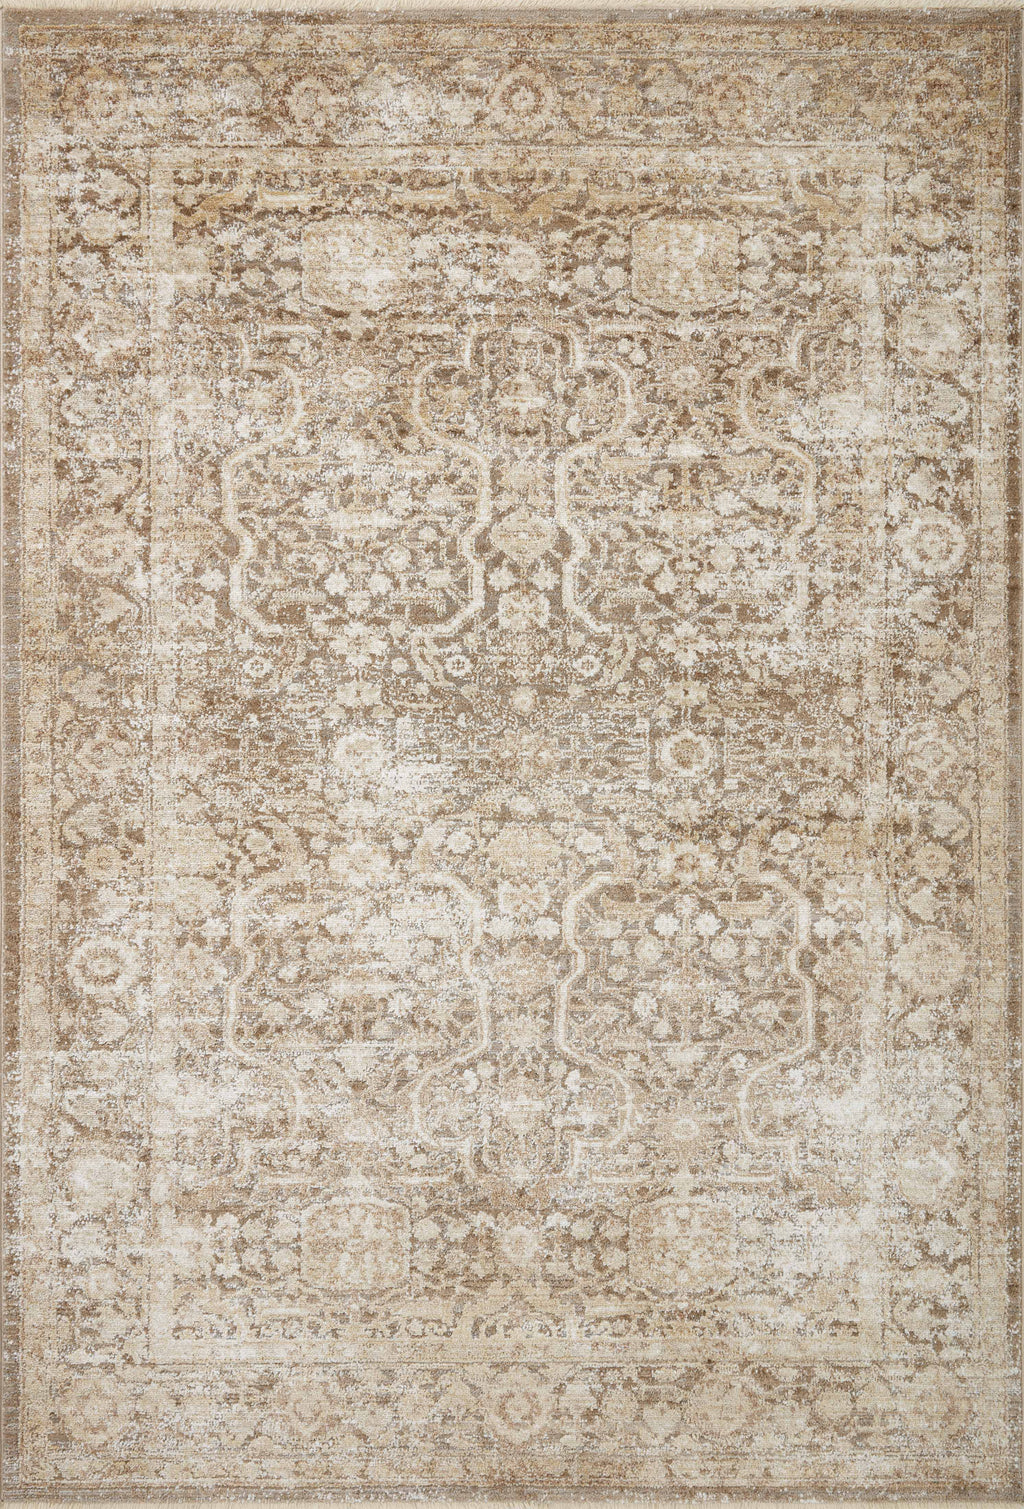 Sonnet Collection Rug in Mocha / Tan Brown sample Power-Loomed Polypropylene/Polyester